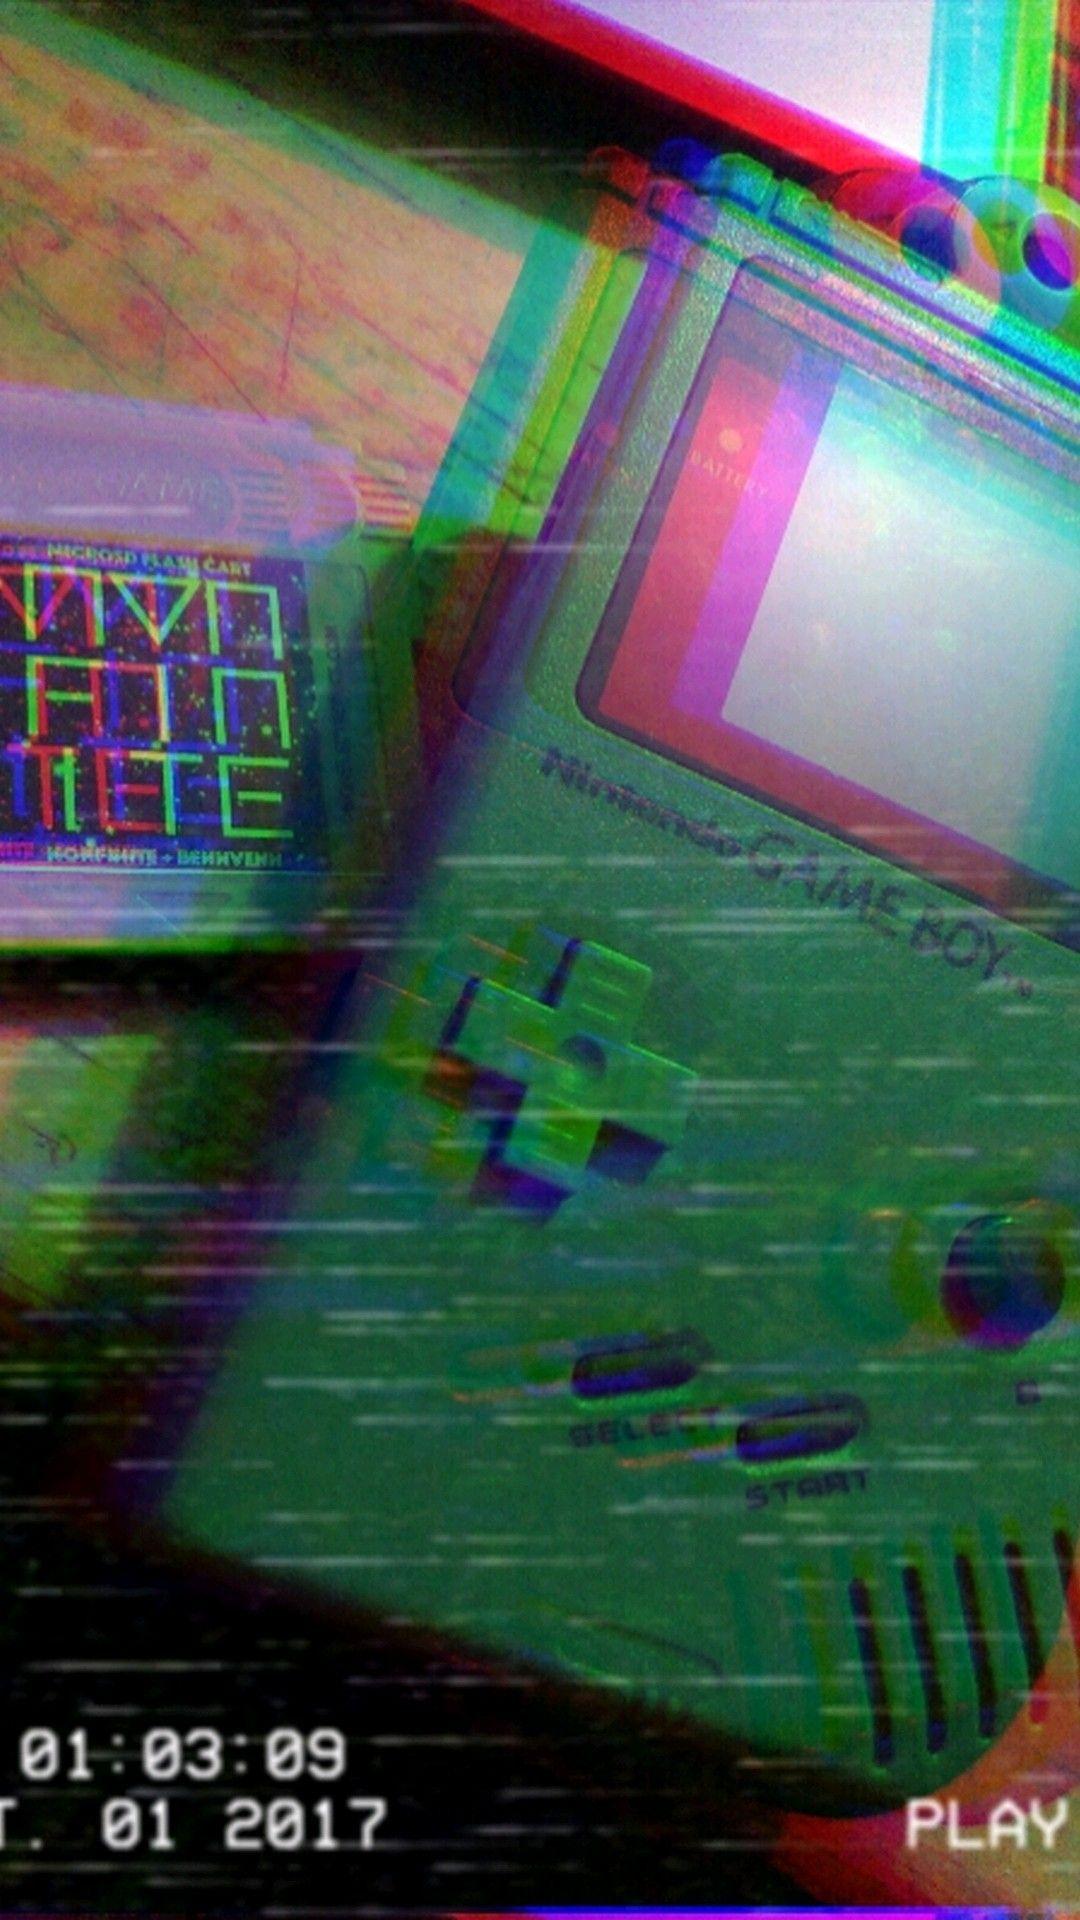 Glitch Aesthetic Wallpapers - Top Free Glitch Aesthetic Backgrounds